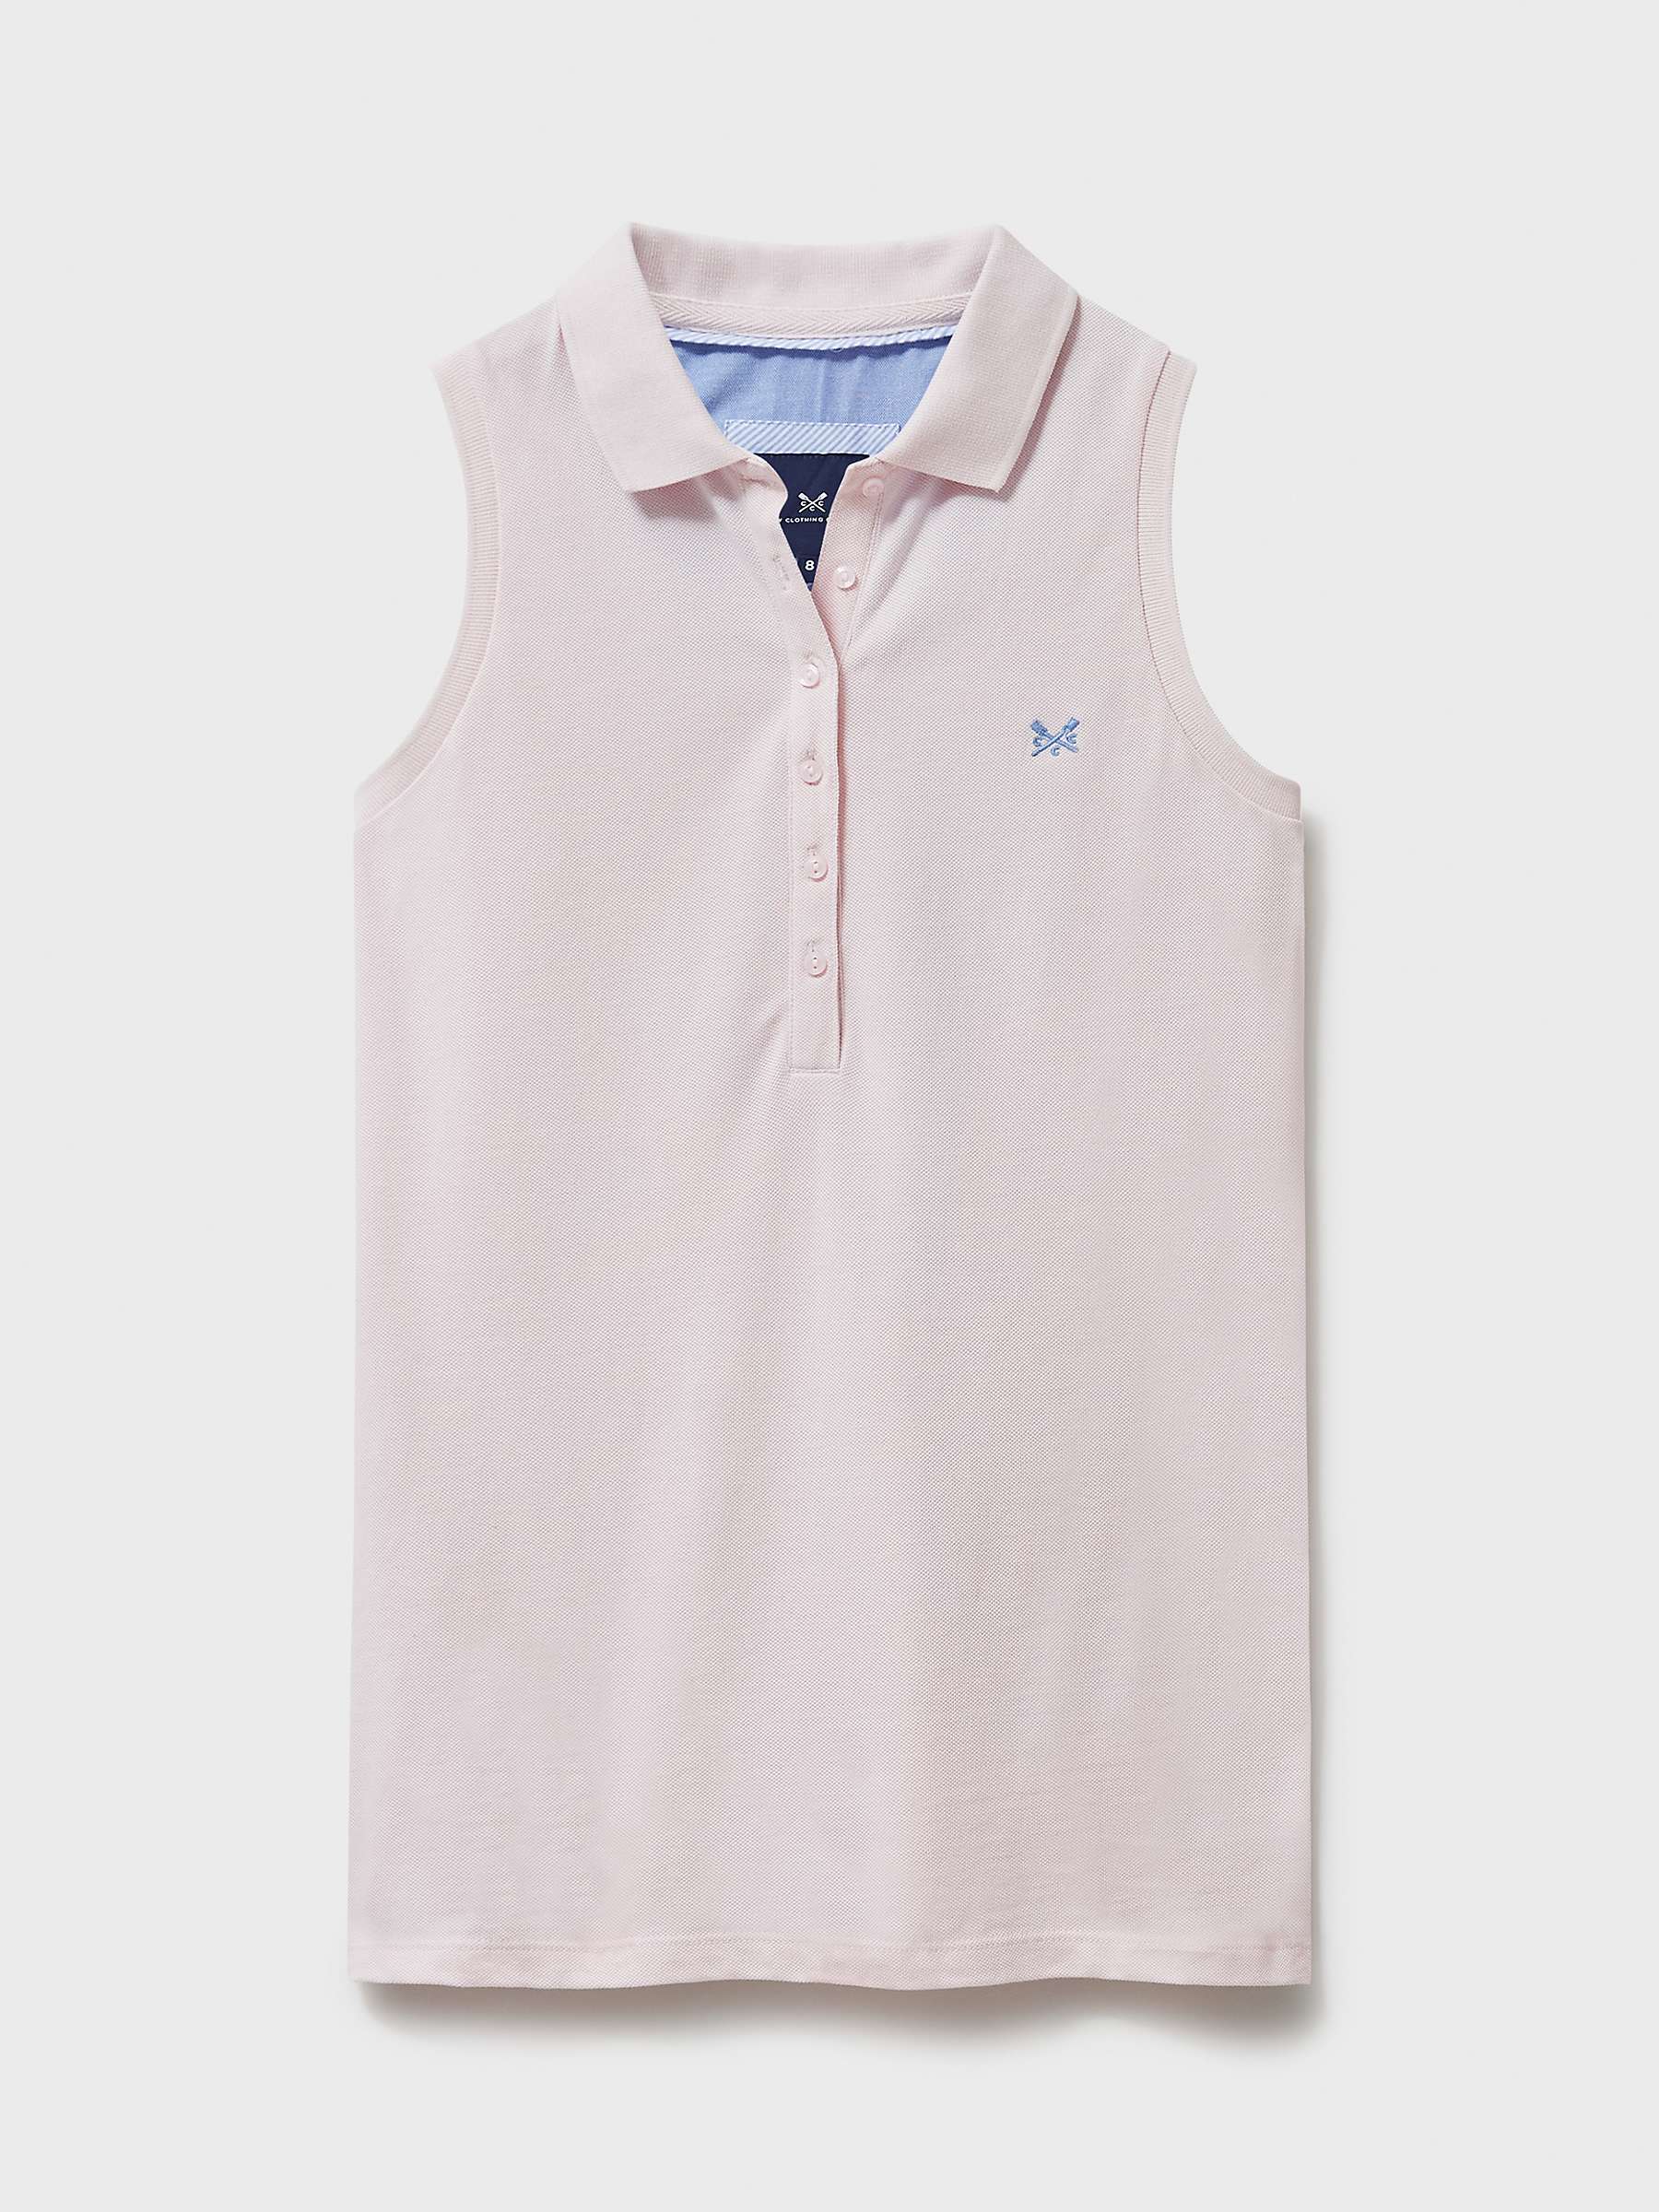 Buy Crew Clothing Ocean Sleeveless Polo Top Online at johnlewis.com